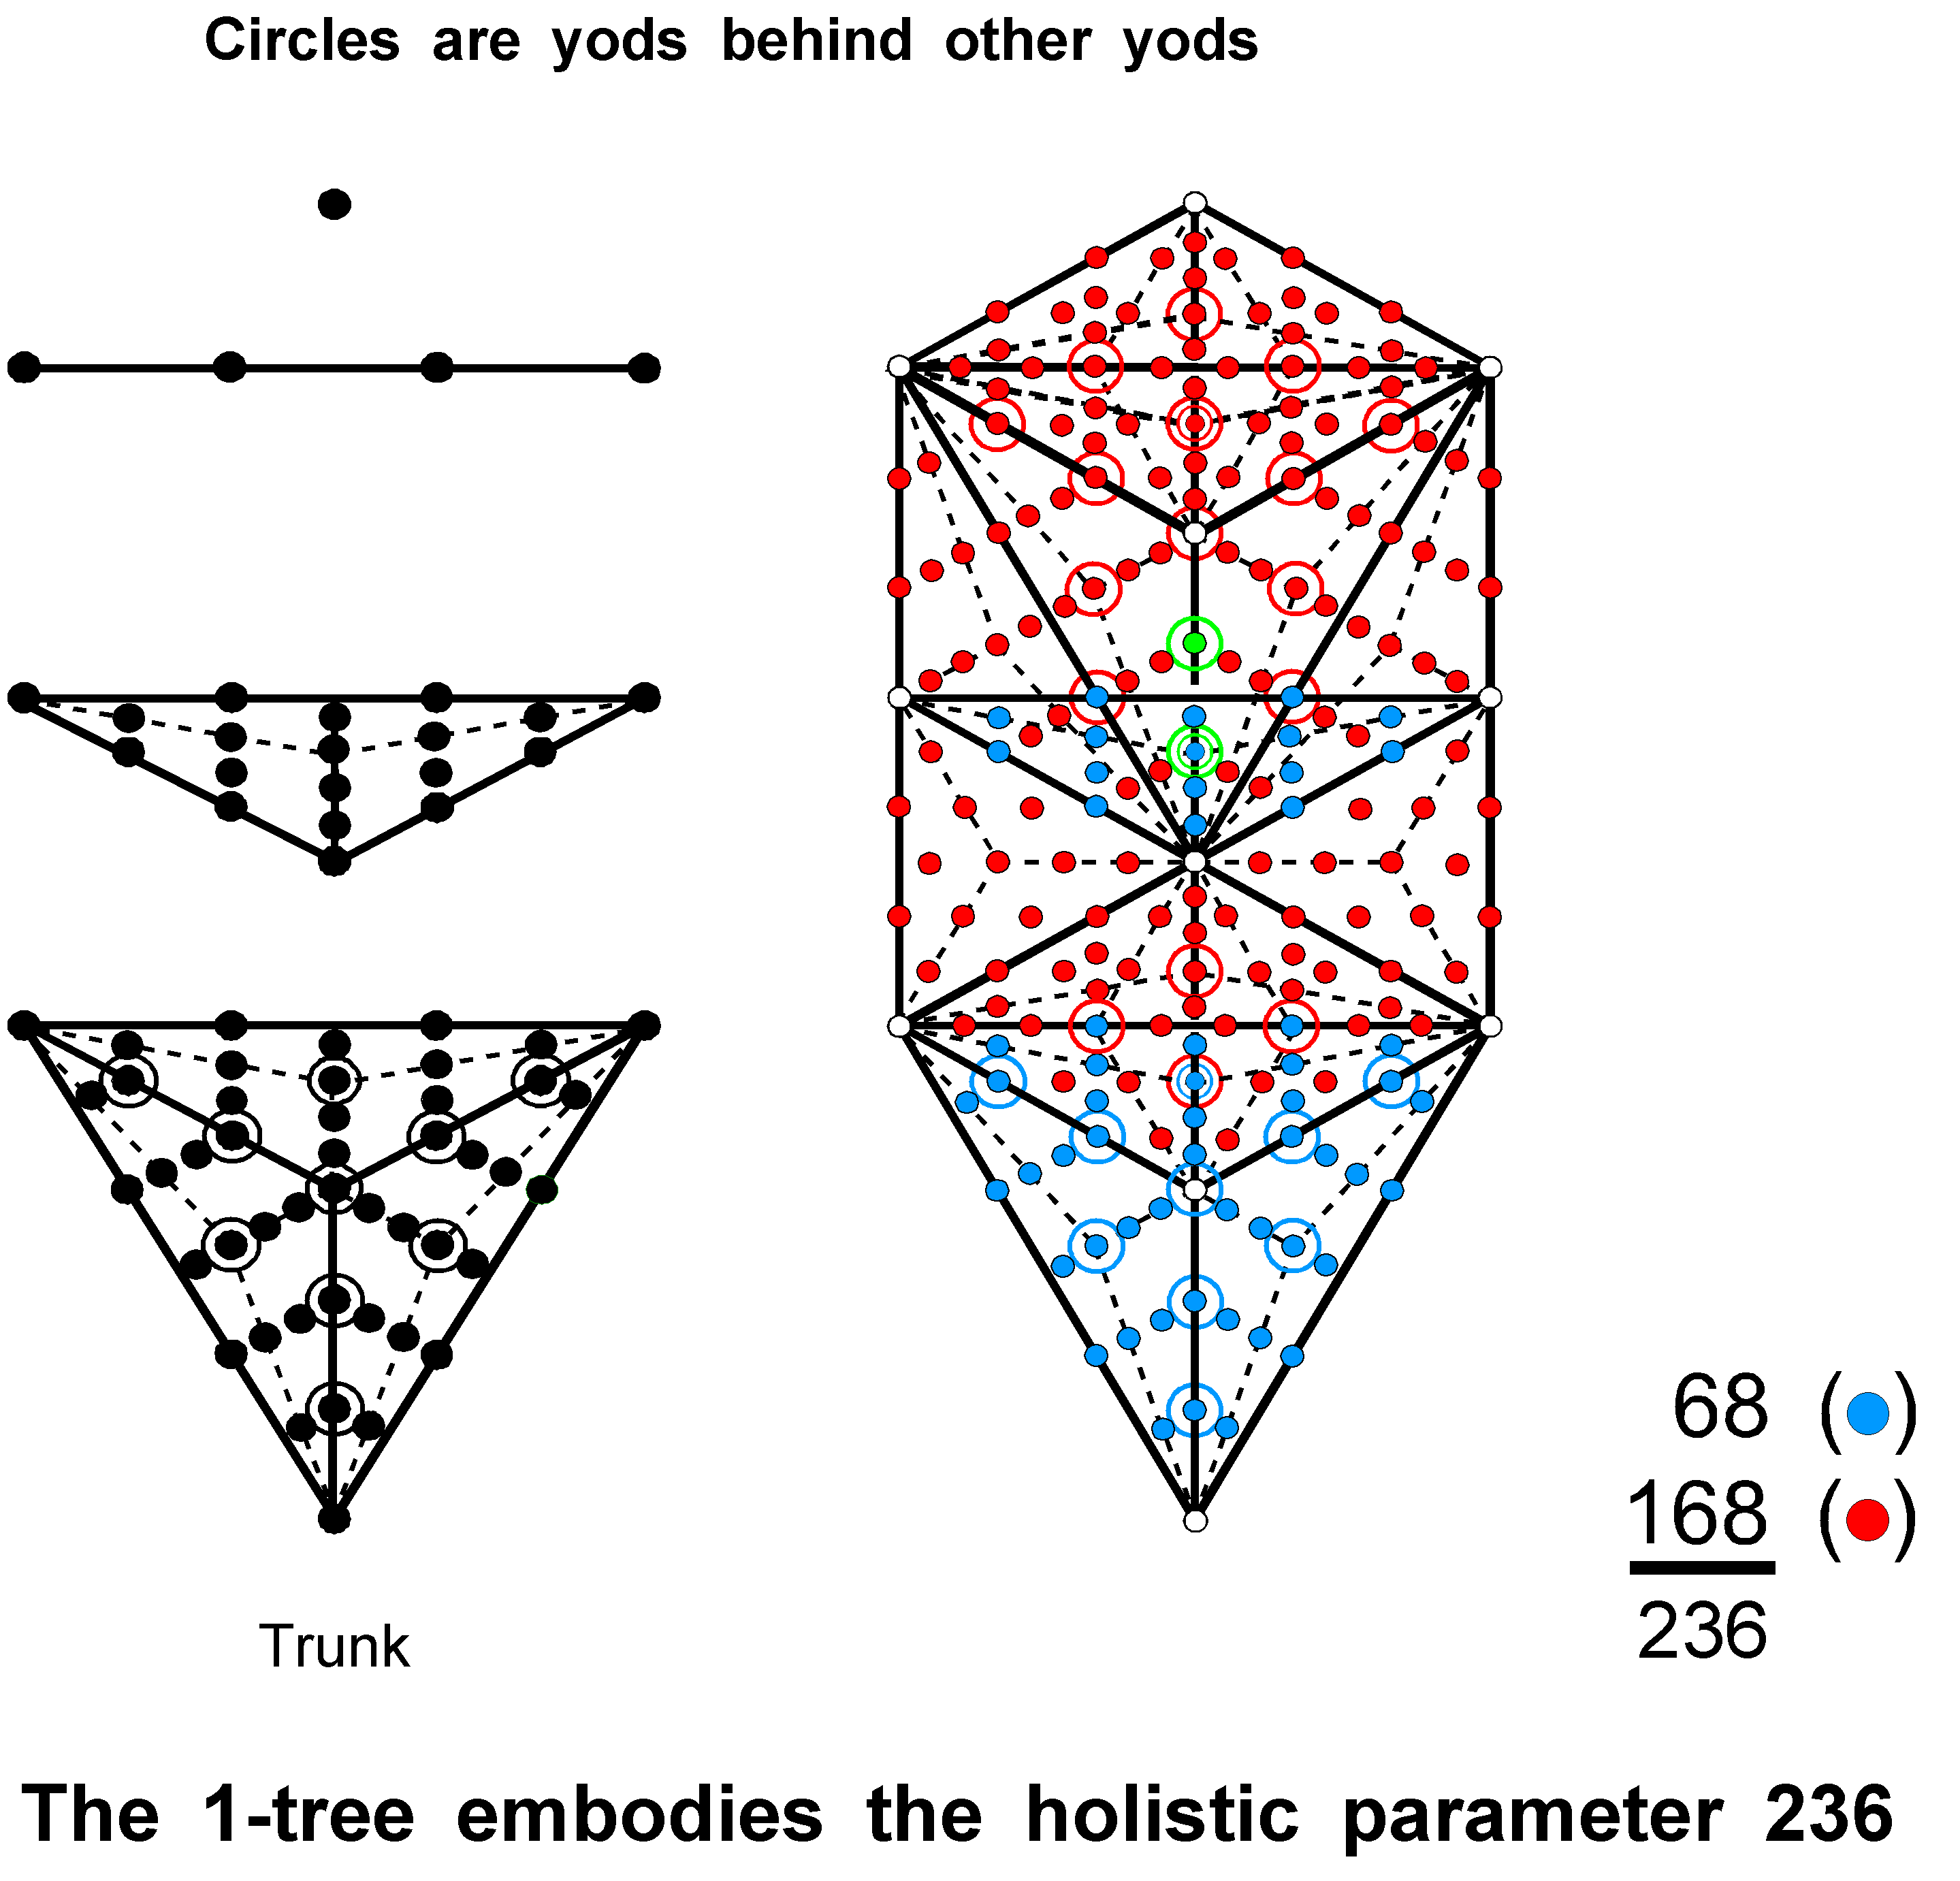 236 embodied in 1-tree